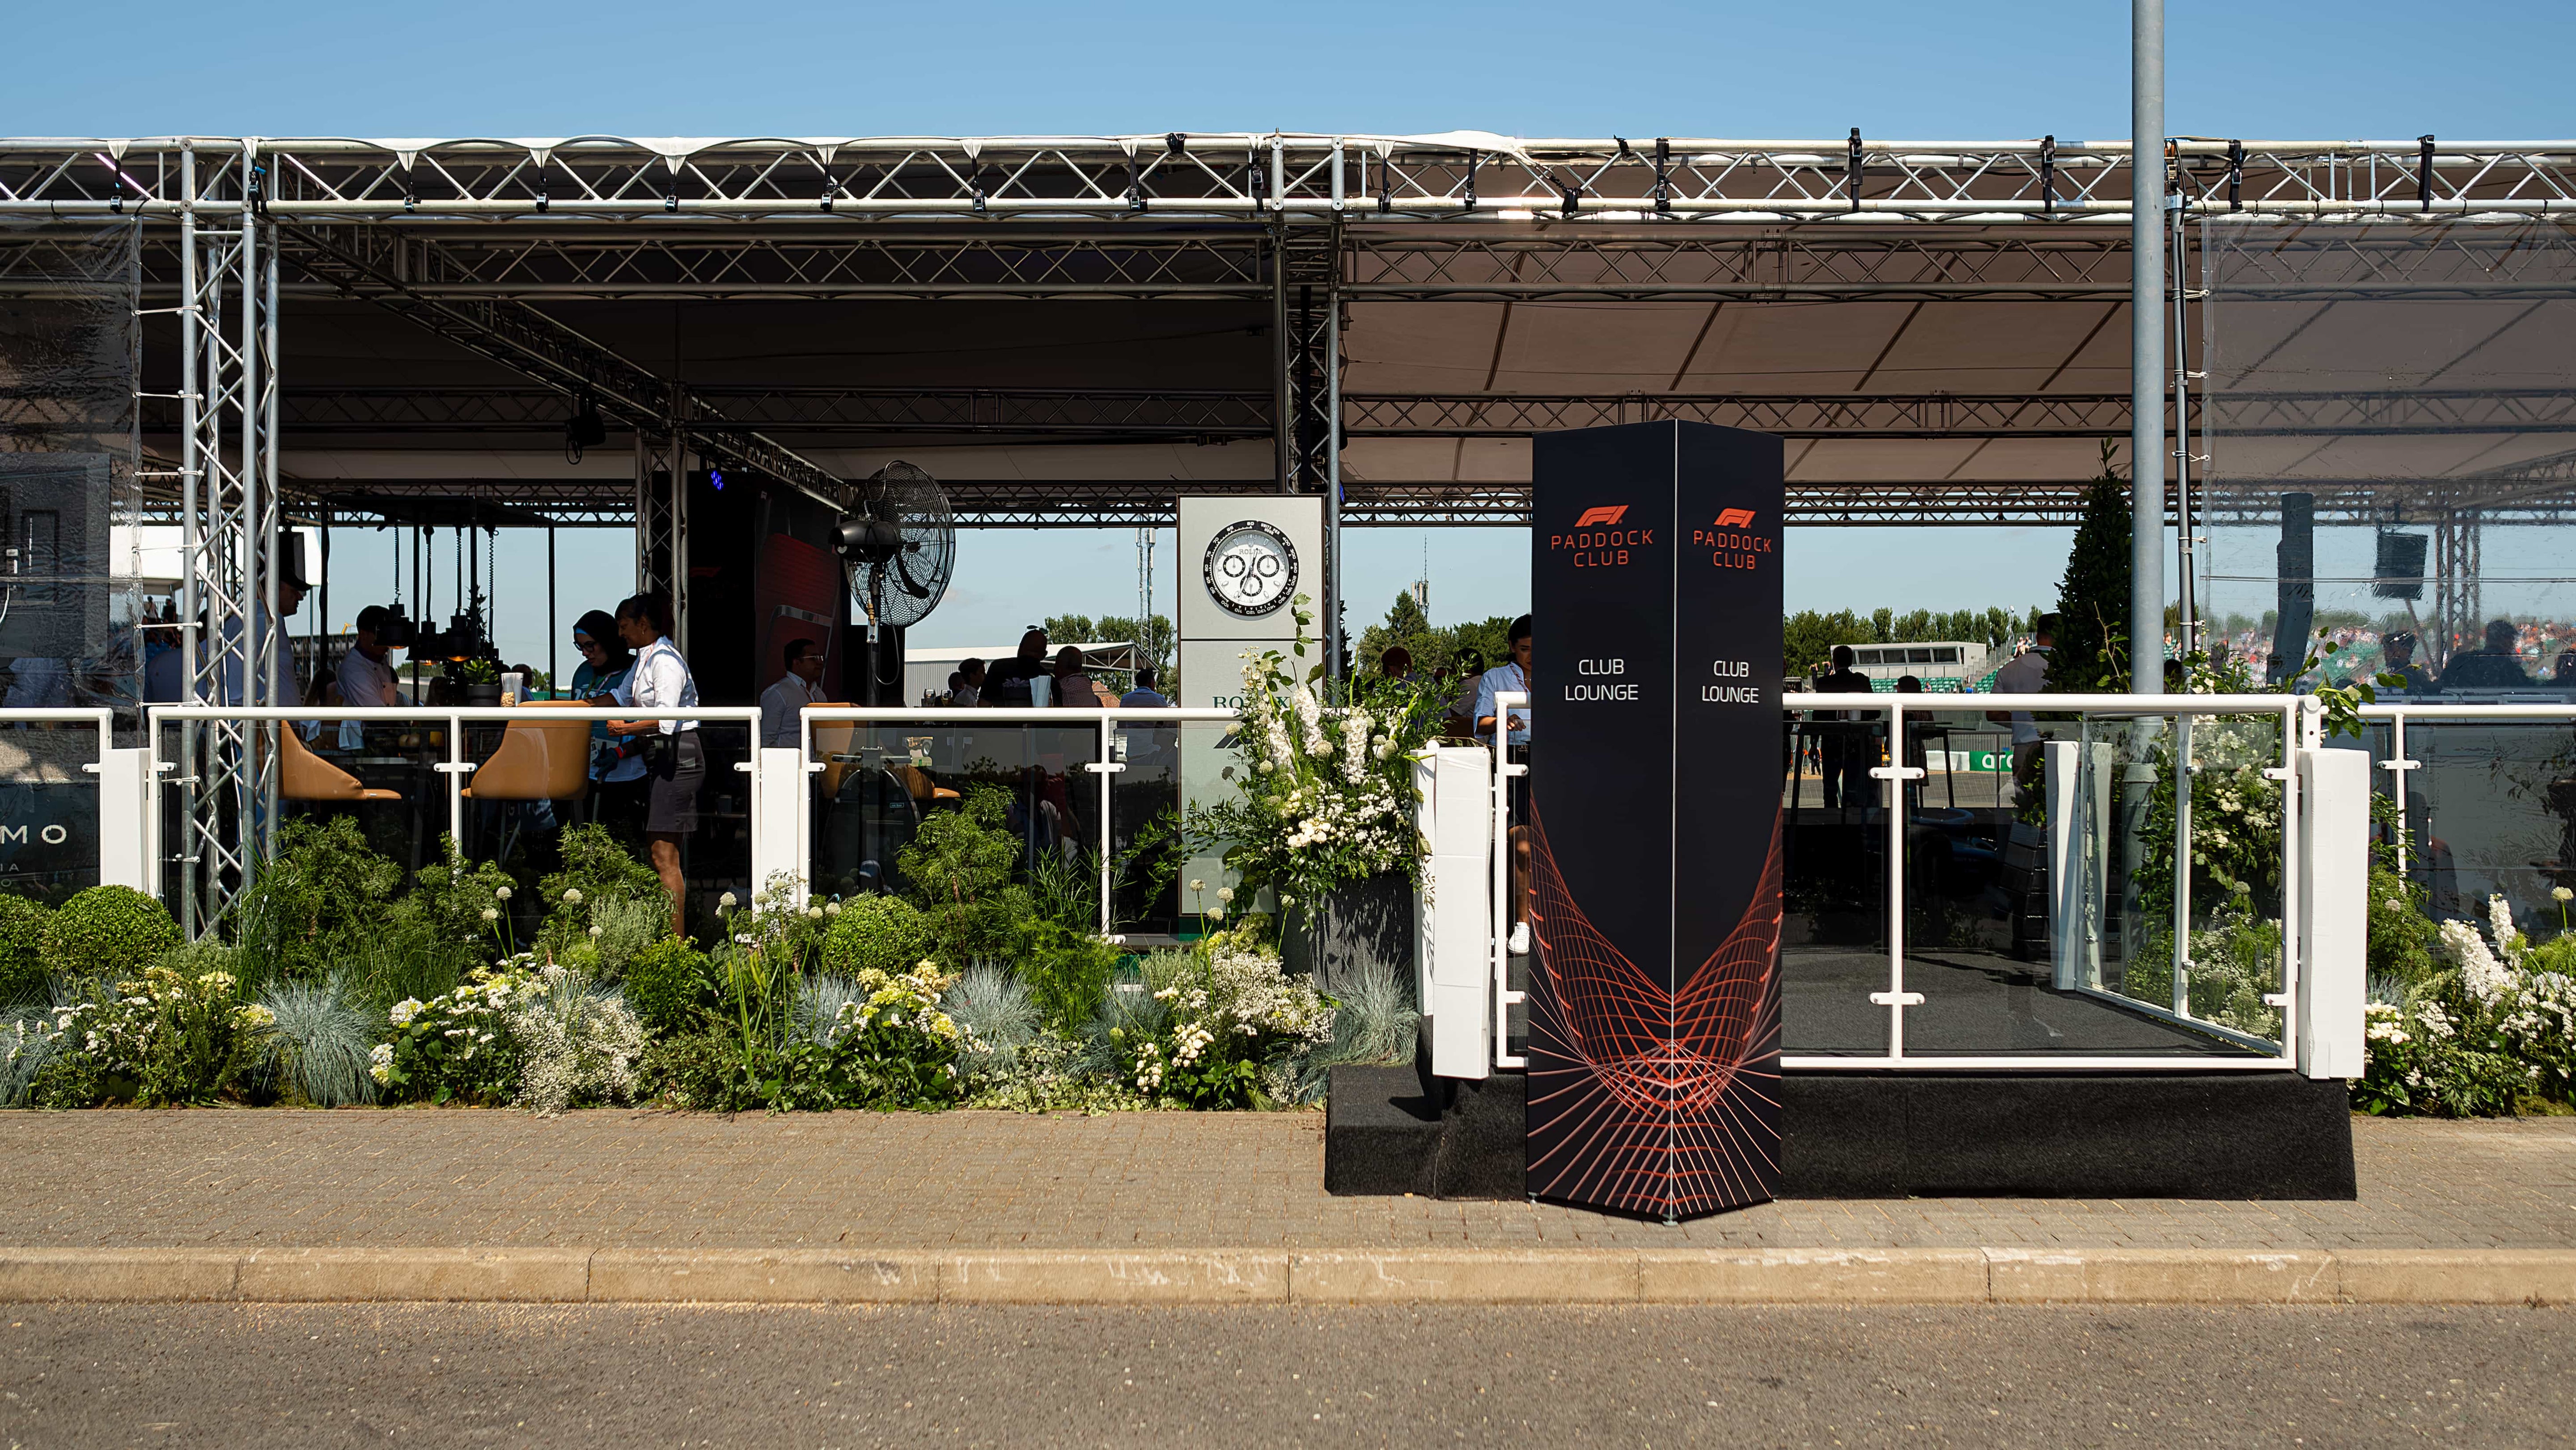 Lush and artfully arranged plant installations enhancing the atmosphere at Formula 1's racing event at Silverstone.